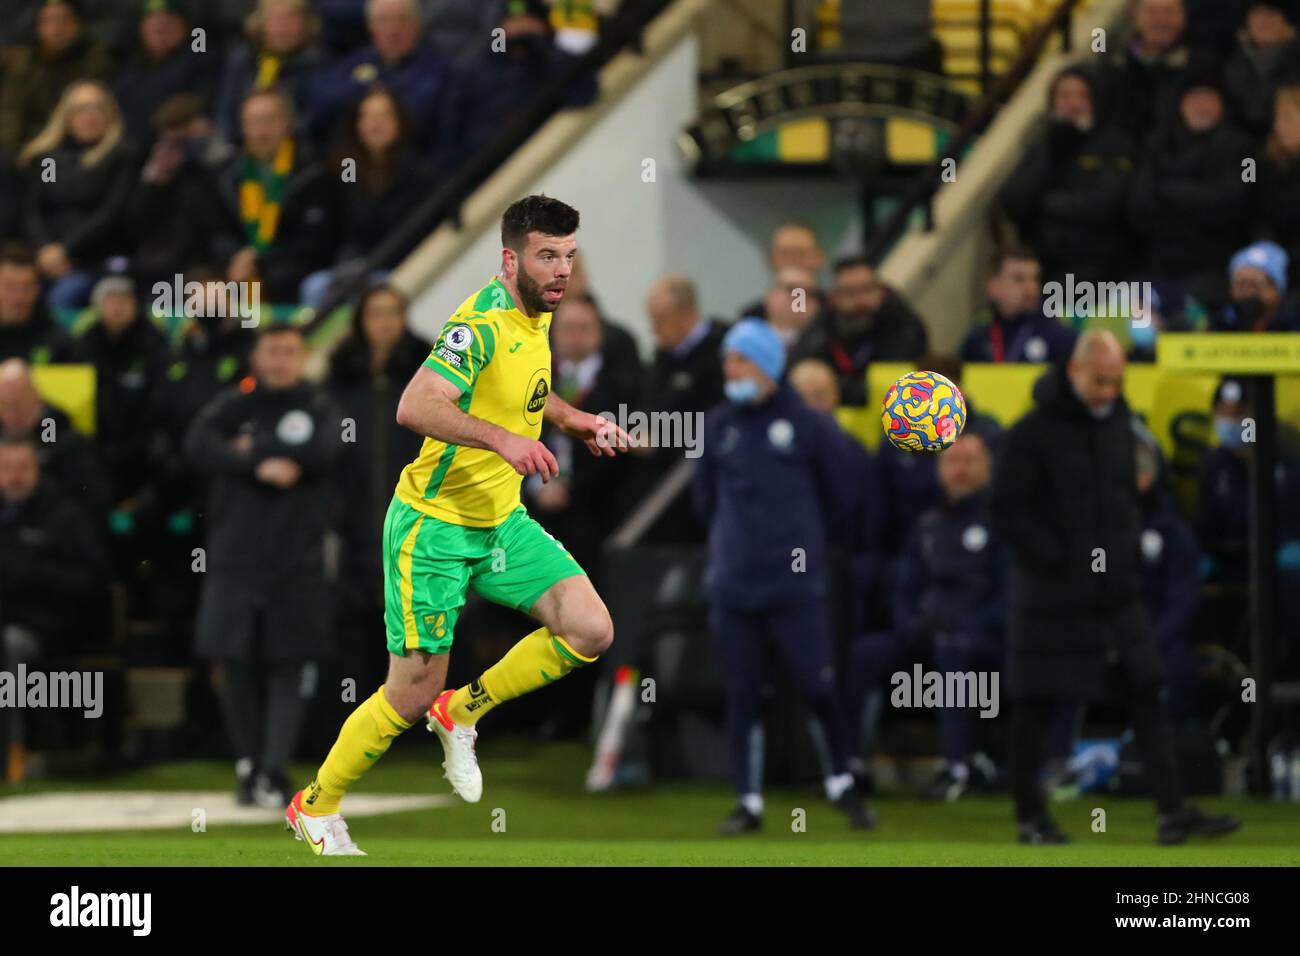 Grant Hanley of Norwich City - Norwich City v Manchester City, Premier League, Carrow Road, Norwich, UK - 12th February 2022  Editorial Use Only - DataCo restrictions apply Stock Photo